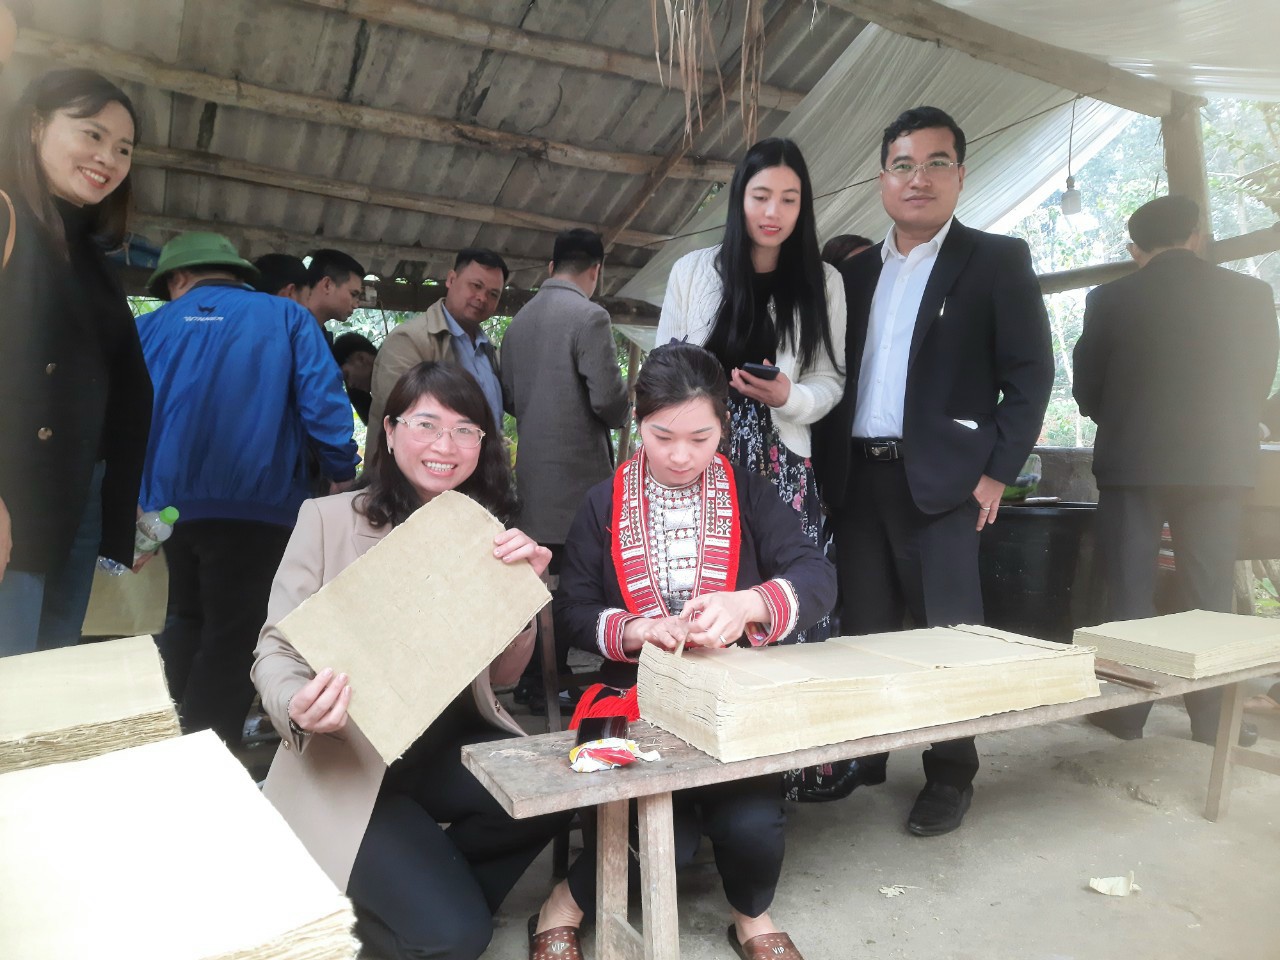 VITIT CENTER VISITED PRODUCTION MODEL OF CRAFT VILLAGE – PRODUCING TRADITIONAL “BAN PAPER” OF “DAO ETHNIC PEOPLE” AND MODEL OF PLANTING ORANGE TREES IN KHUOI XIU COMMUNE AND THANH SON COMMUNNE, VIET QUANG TOWN, BAC QUANG DISTRICT, HA GIANG PROVINCE.